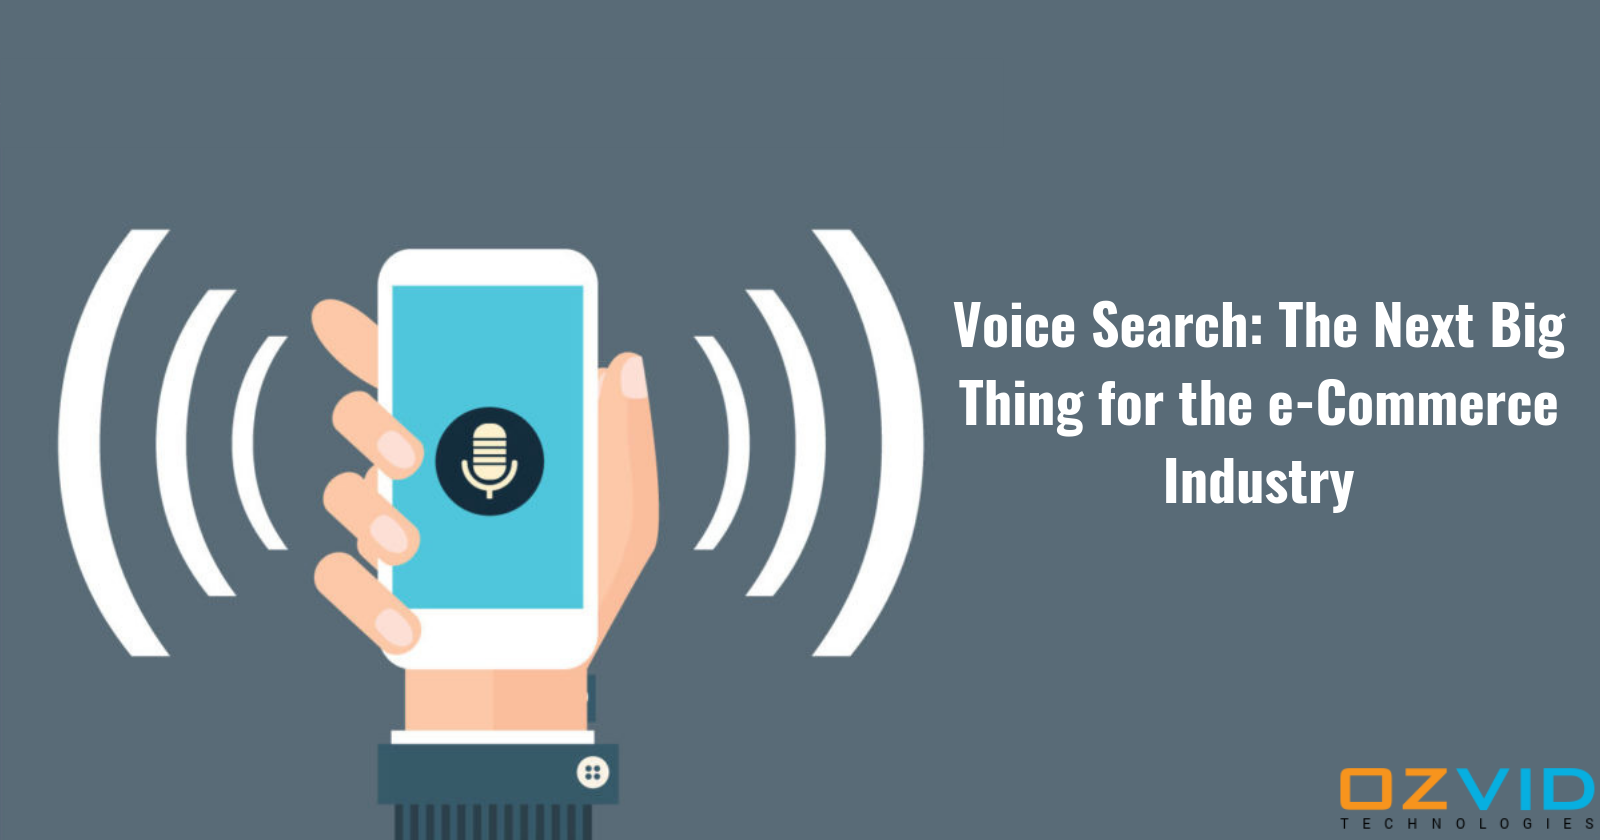 Is Voice Search the Next Big Thing for E-commerce Sector?